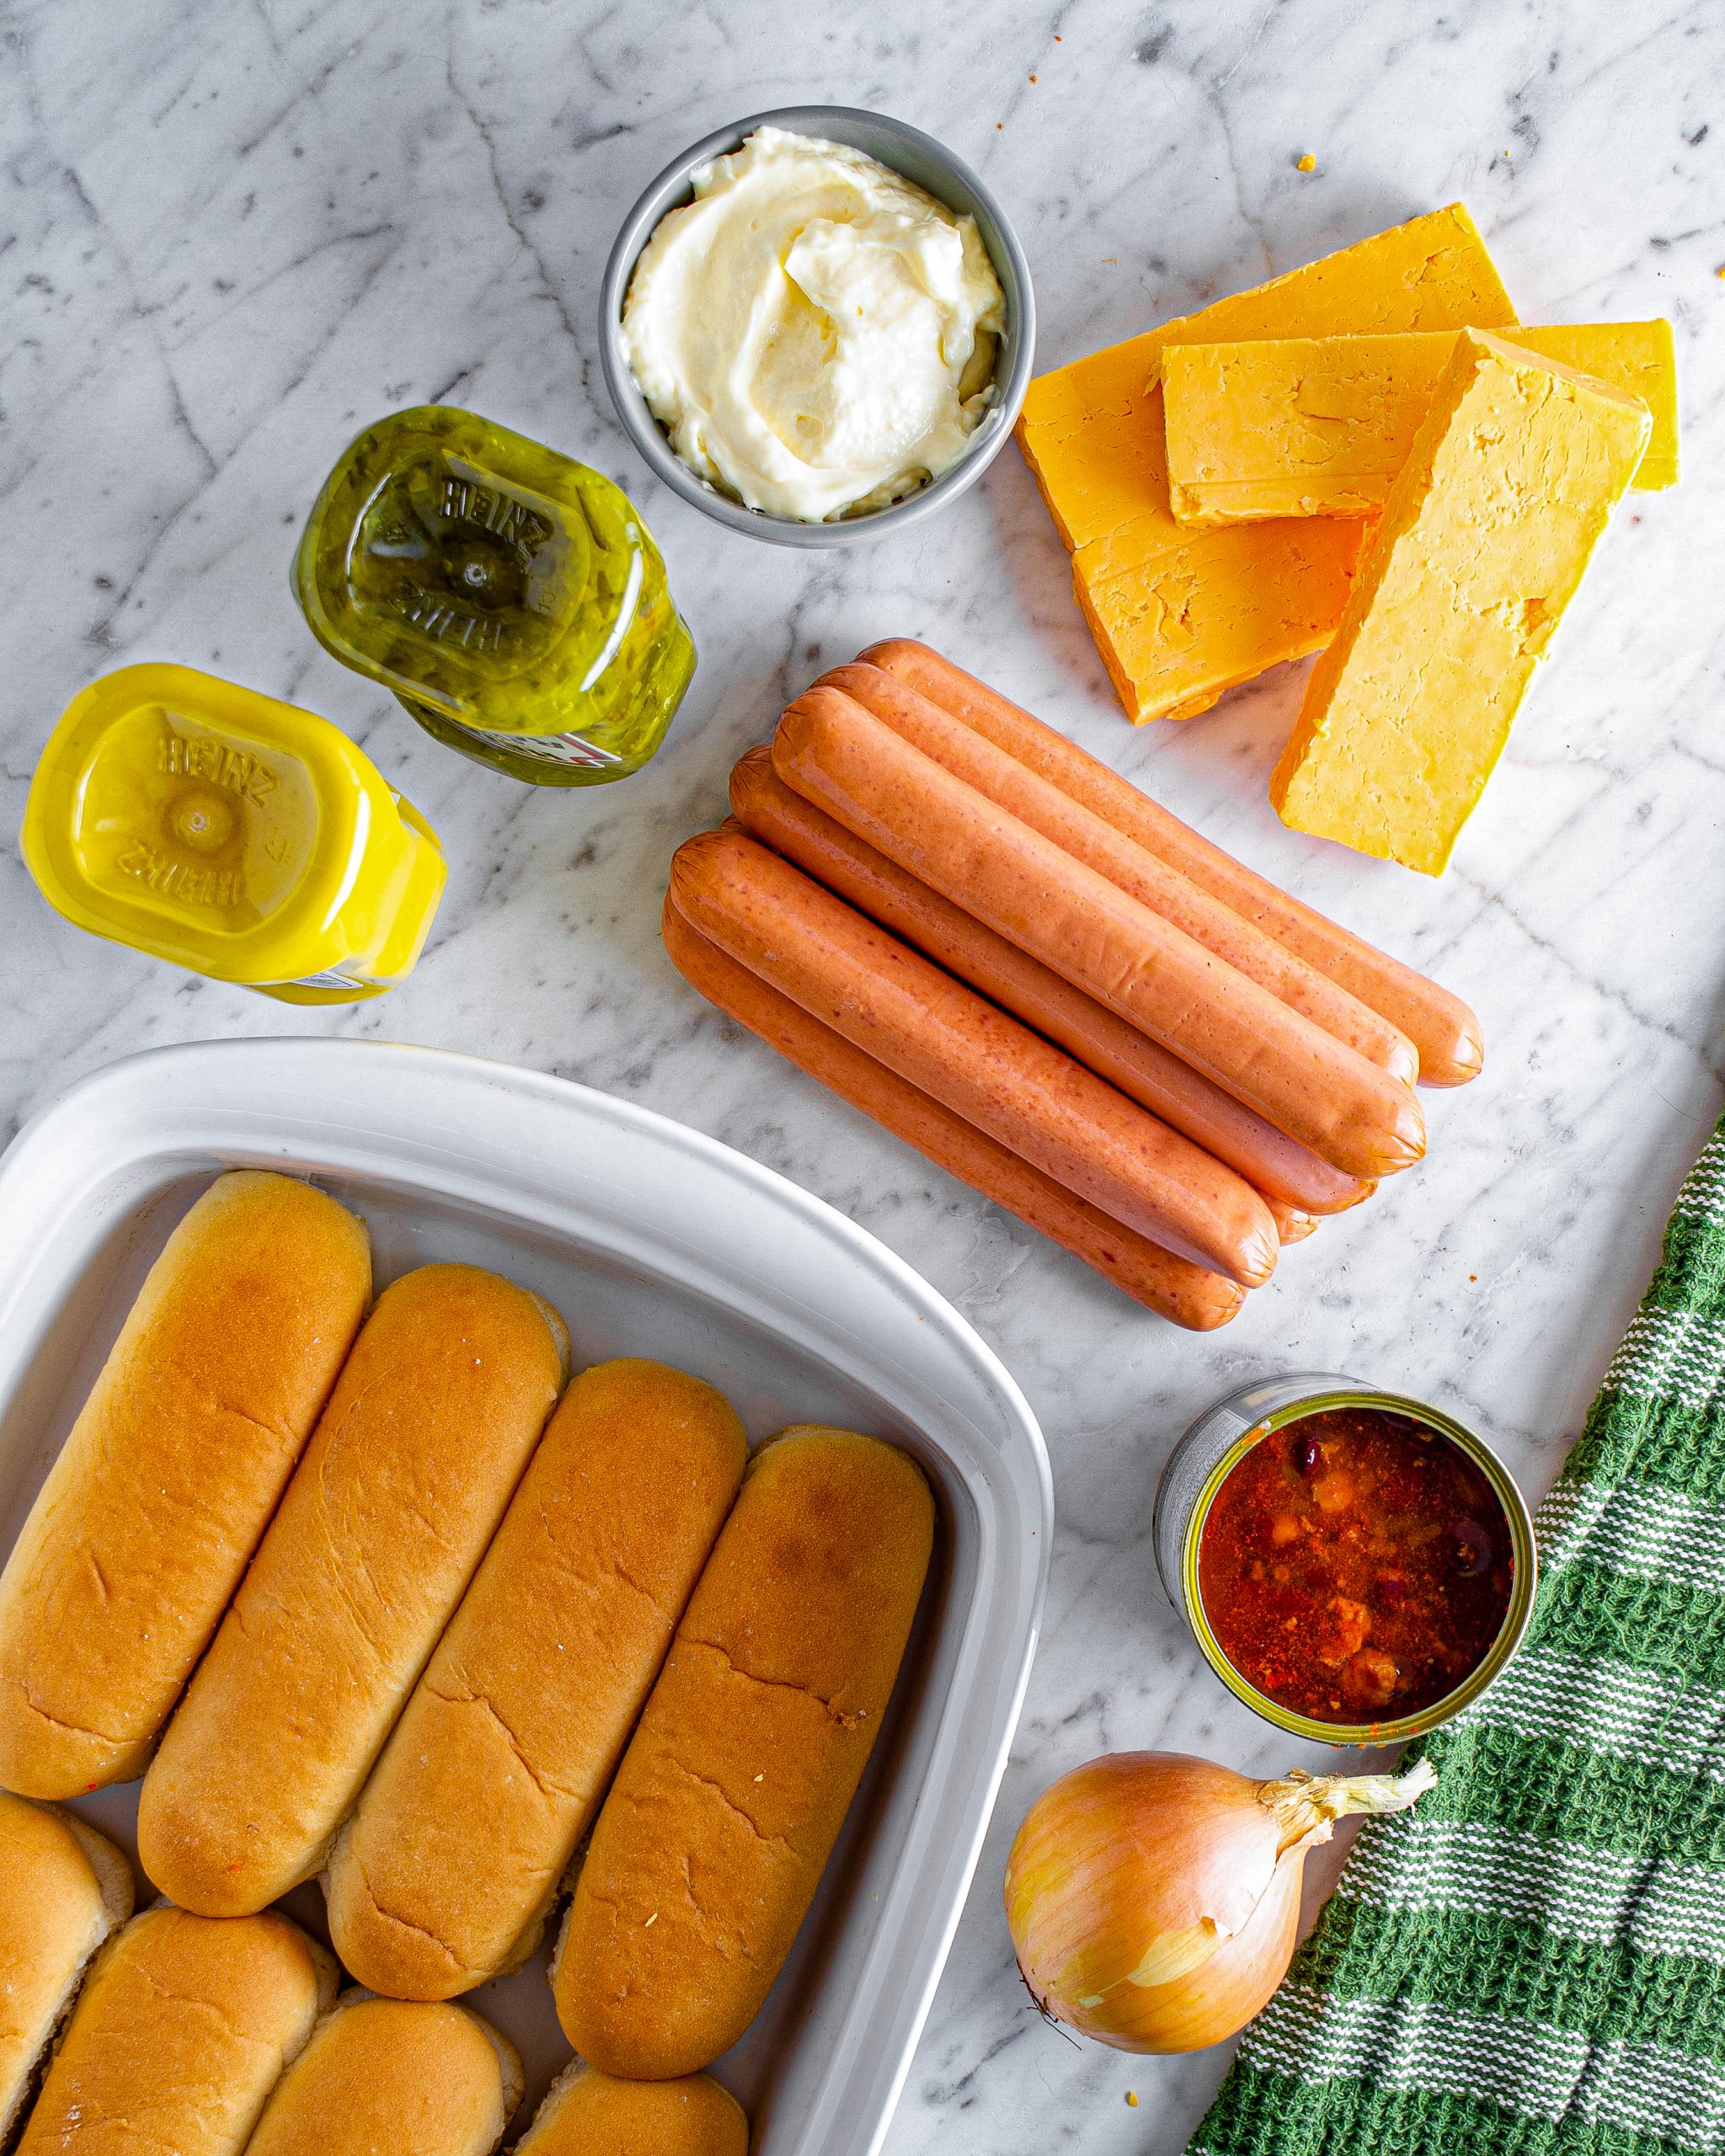 oven baked hot dogs ingredients